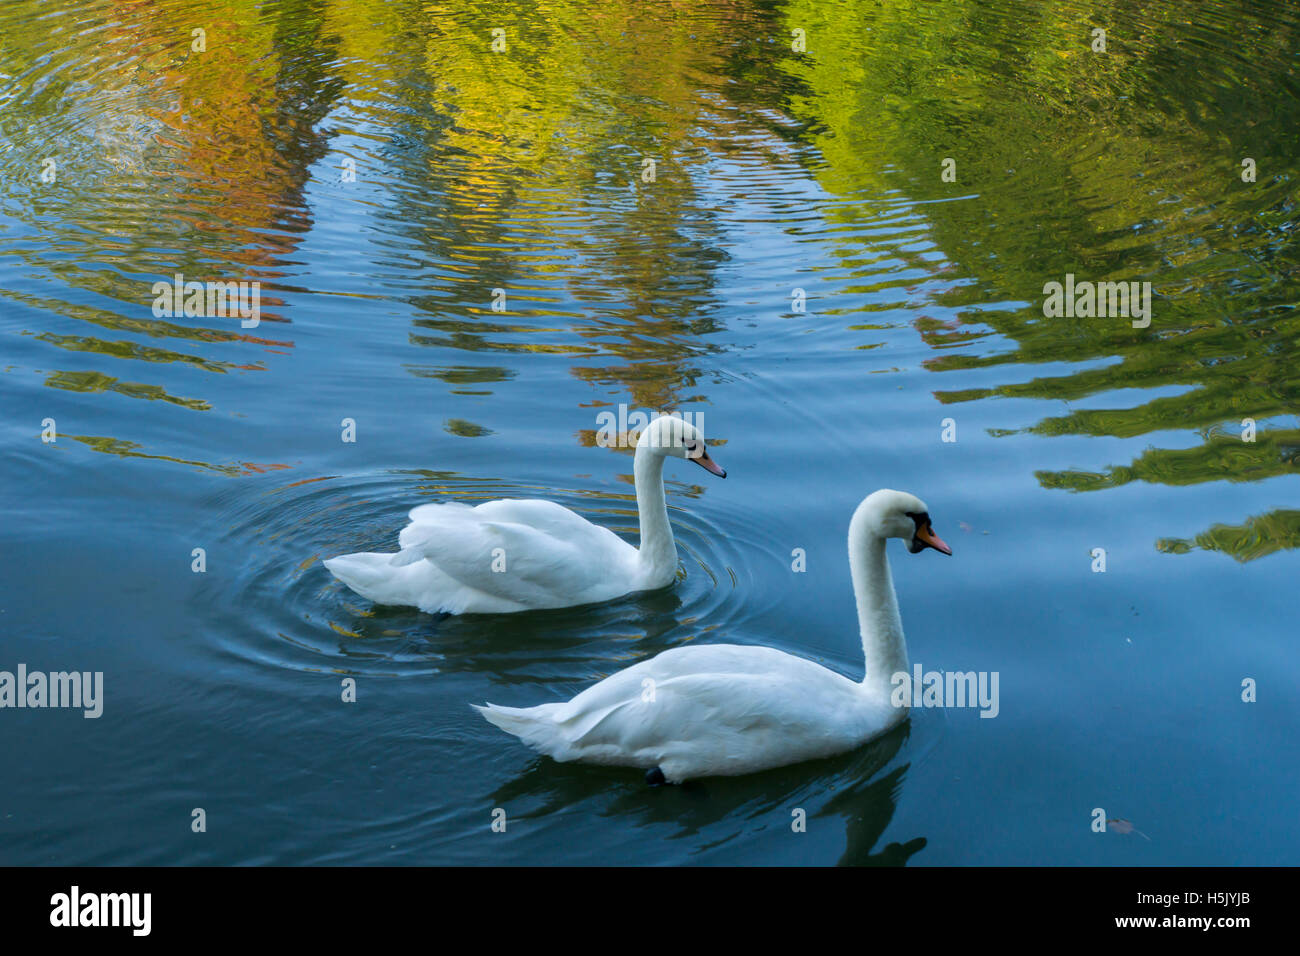 a view of two swans swimming in a pond Stock Photo